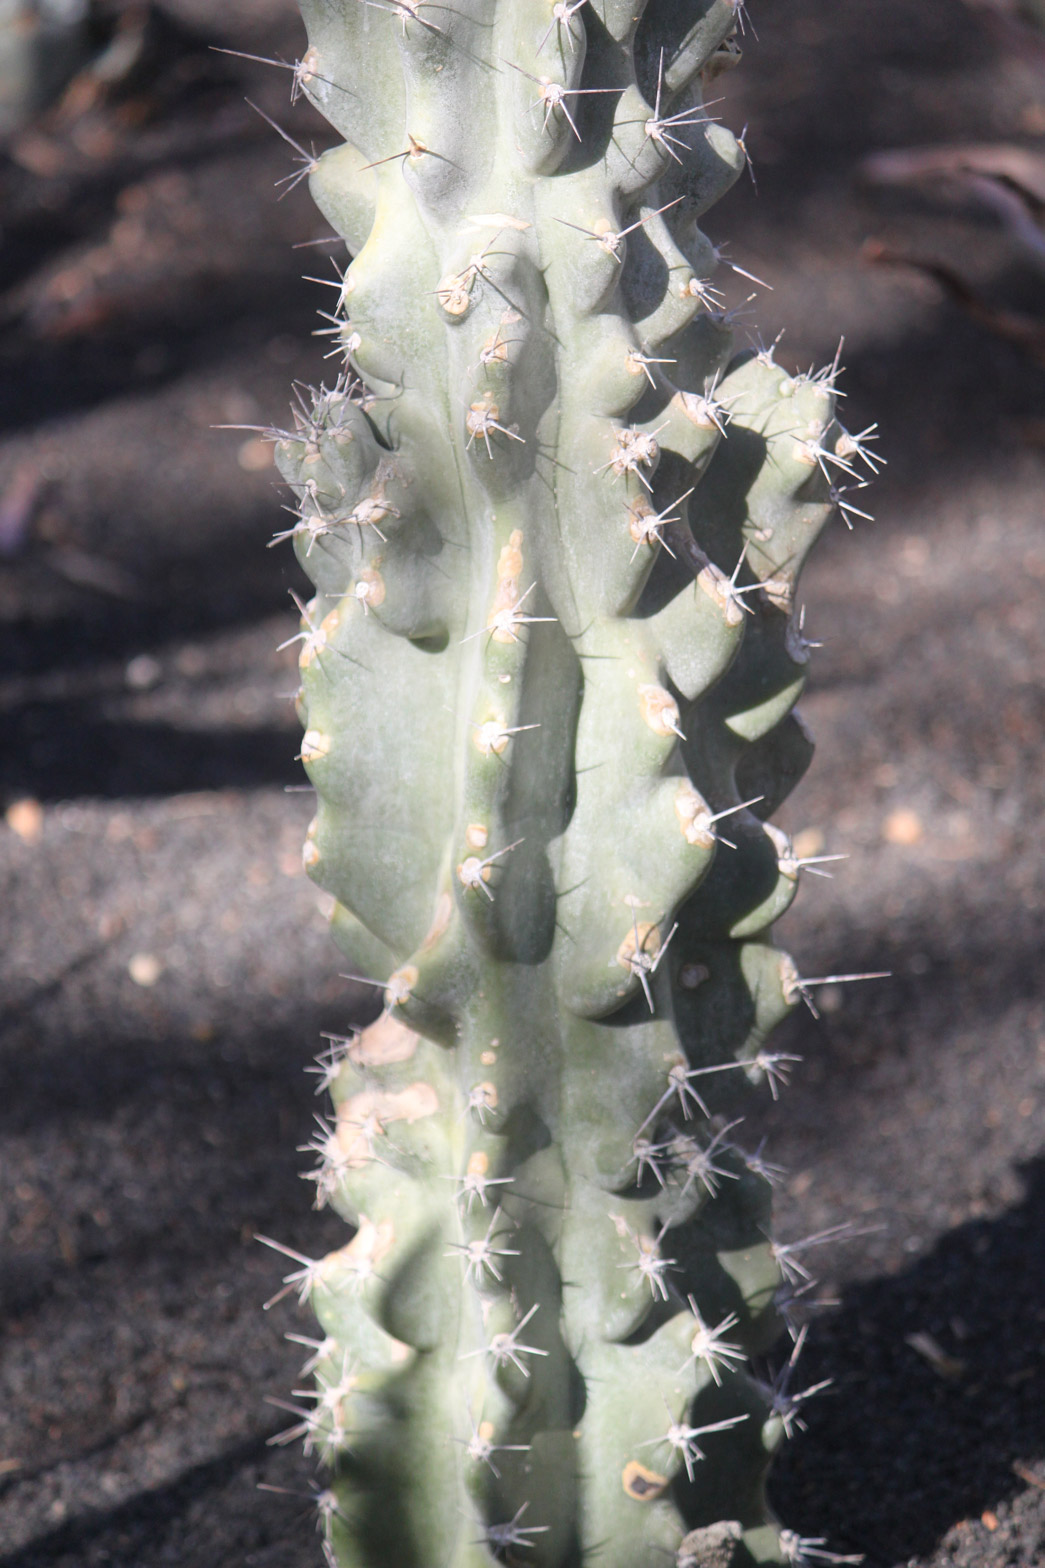 A close-up of a Night-blooming Cereus cactus spines.